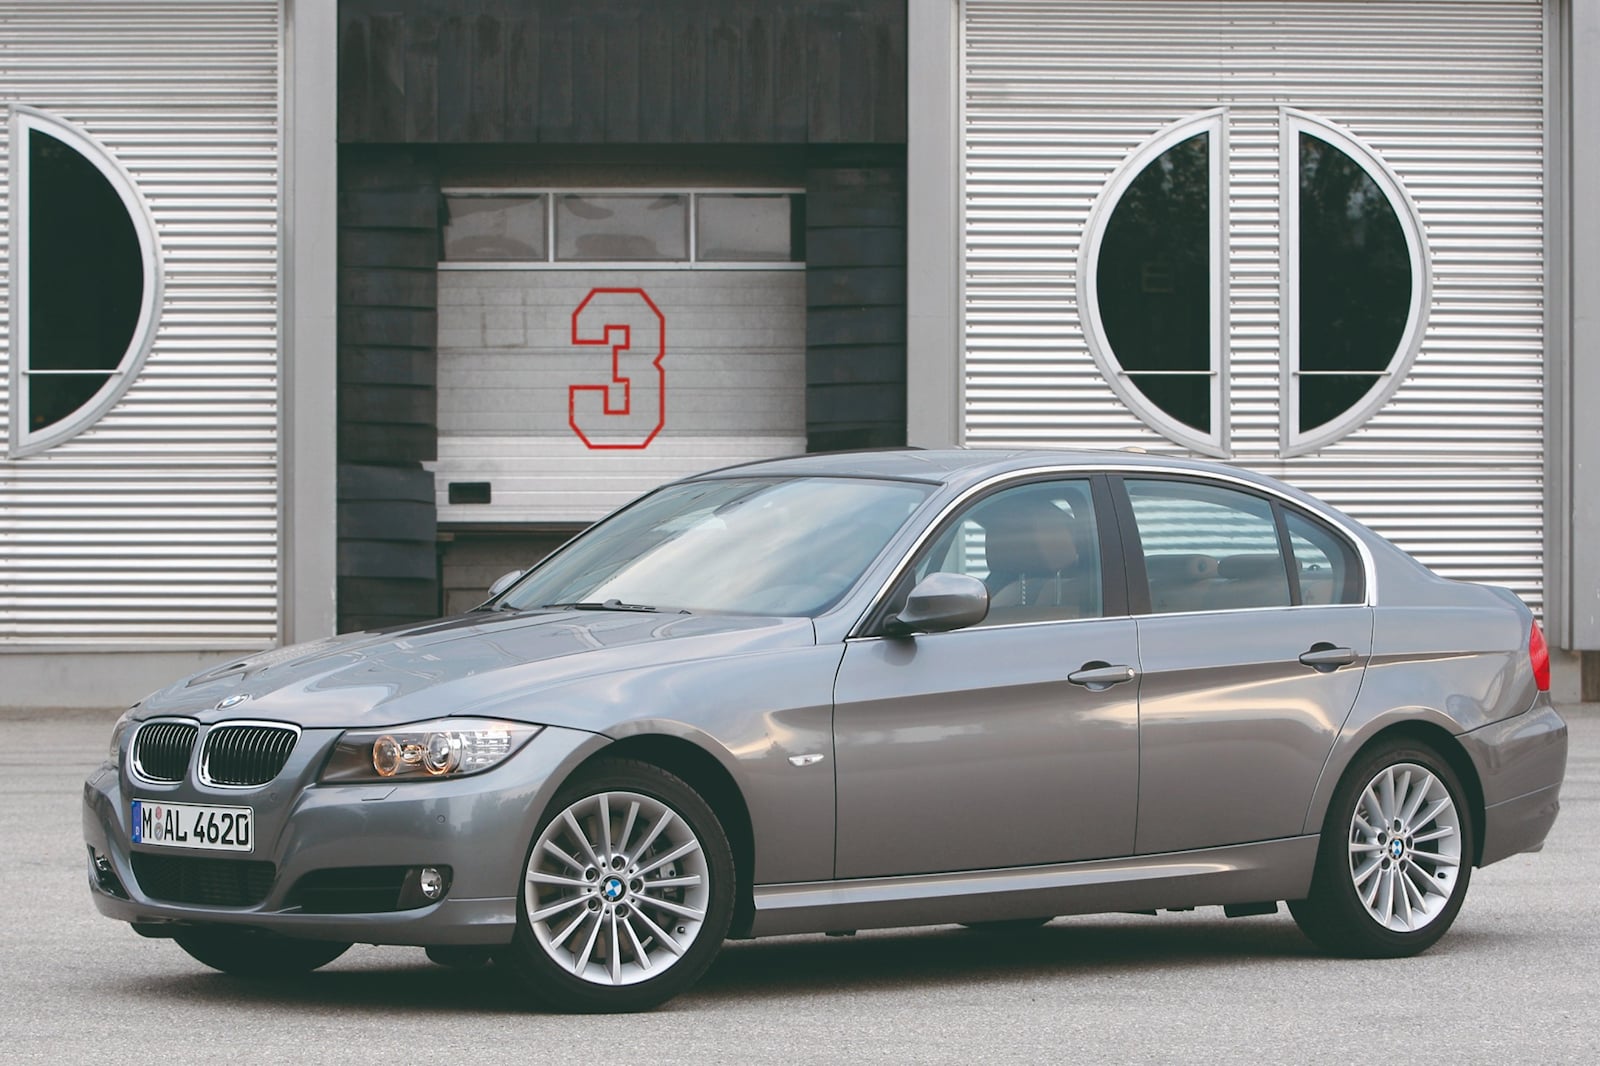 BMW 3 Series 5th Generation (E90) - What To Check Before You Buy | CarBuzz